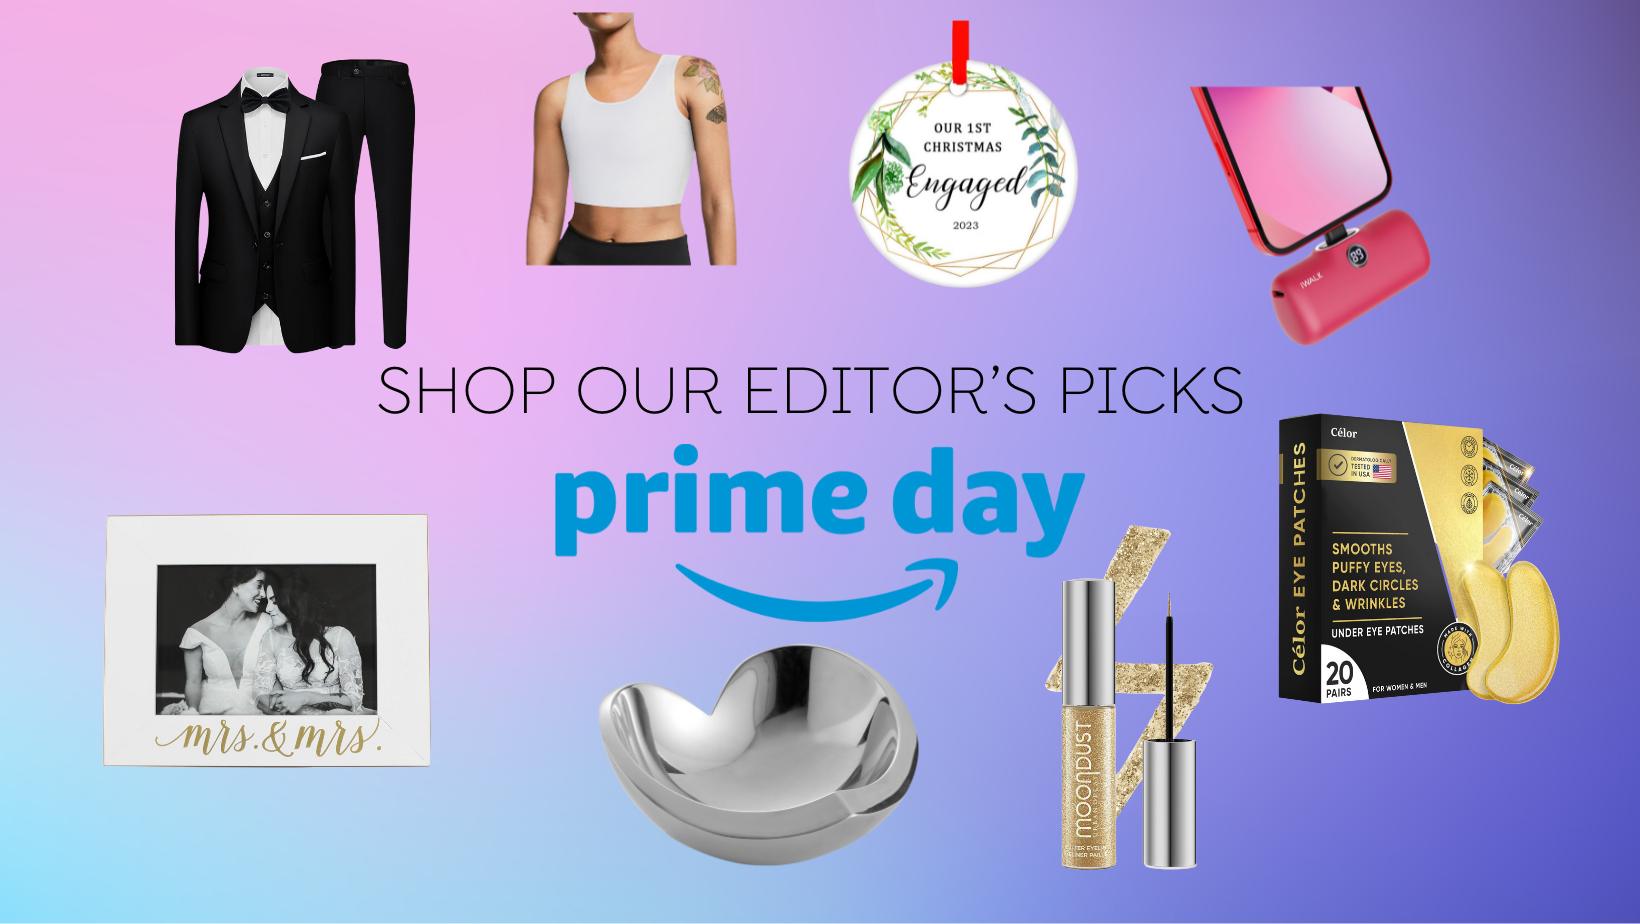 October 2023 Prime Big Day Deal most selling items